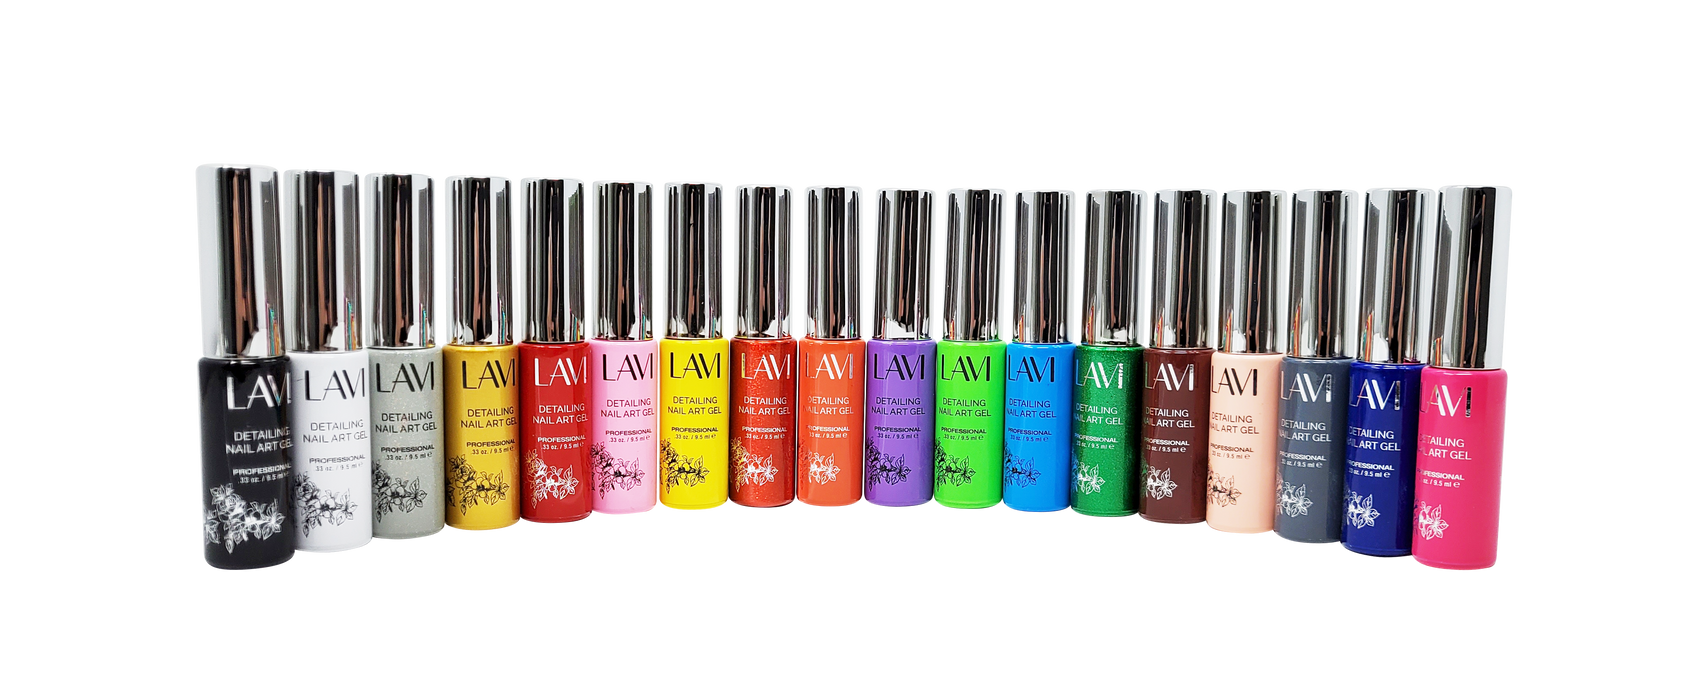 Lavi Detailing Nail Art Gel, 0.33oz, Full Line Of 28 Colors ( From 01 to 28)